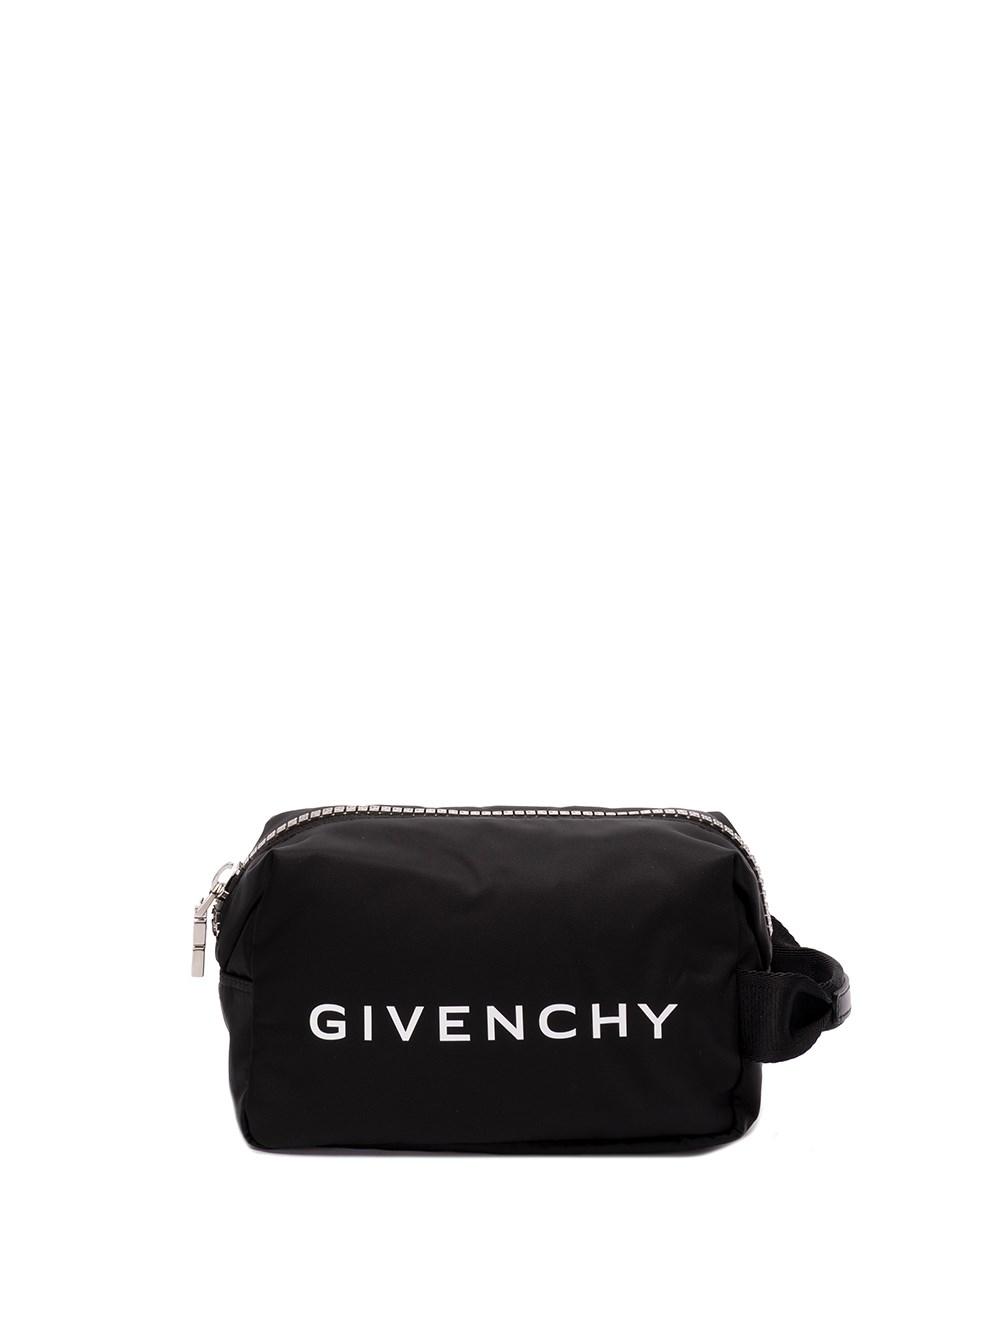 Givenchy `g-zip` Toilet Pouch in Black for Men | Lyst